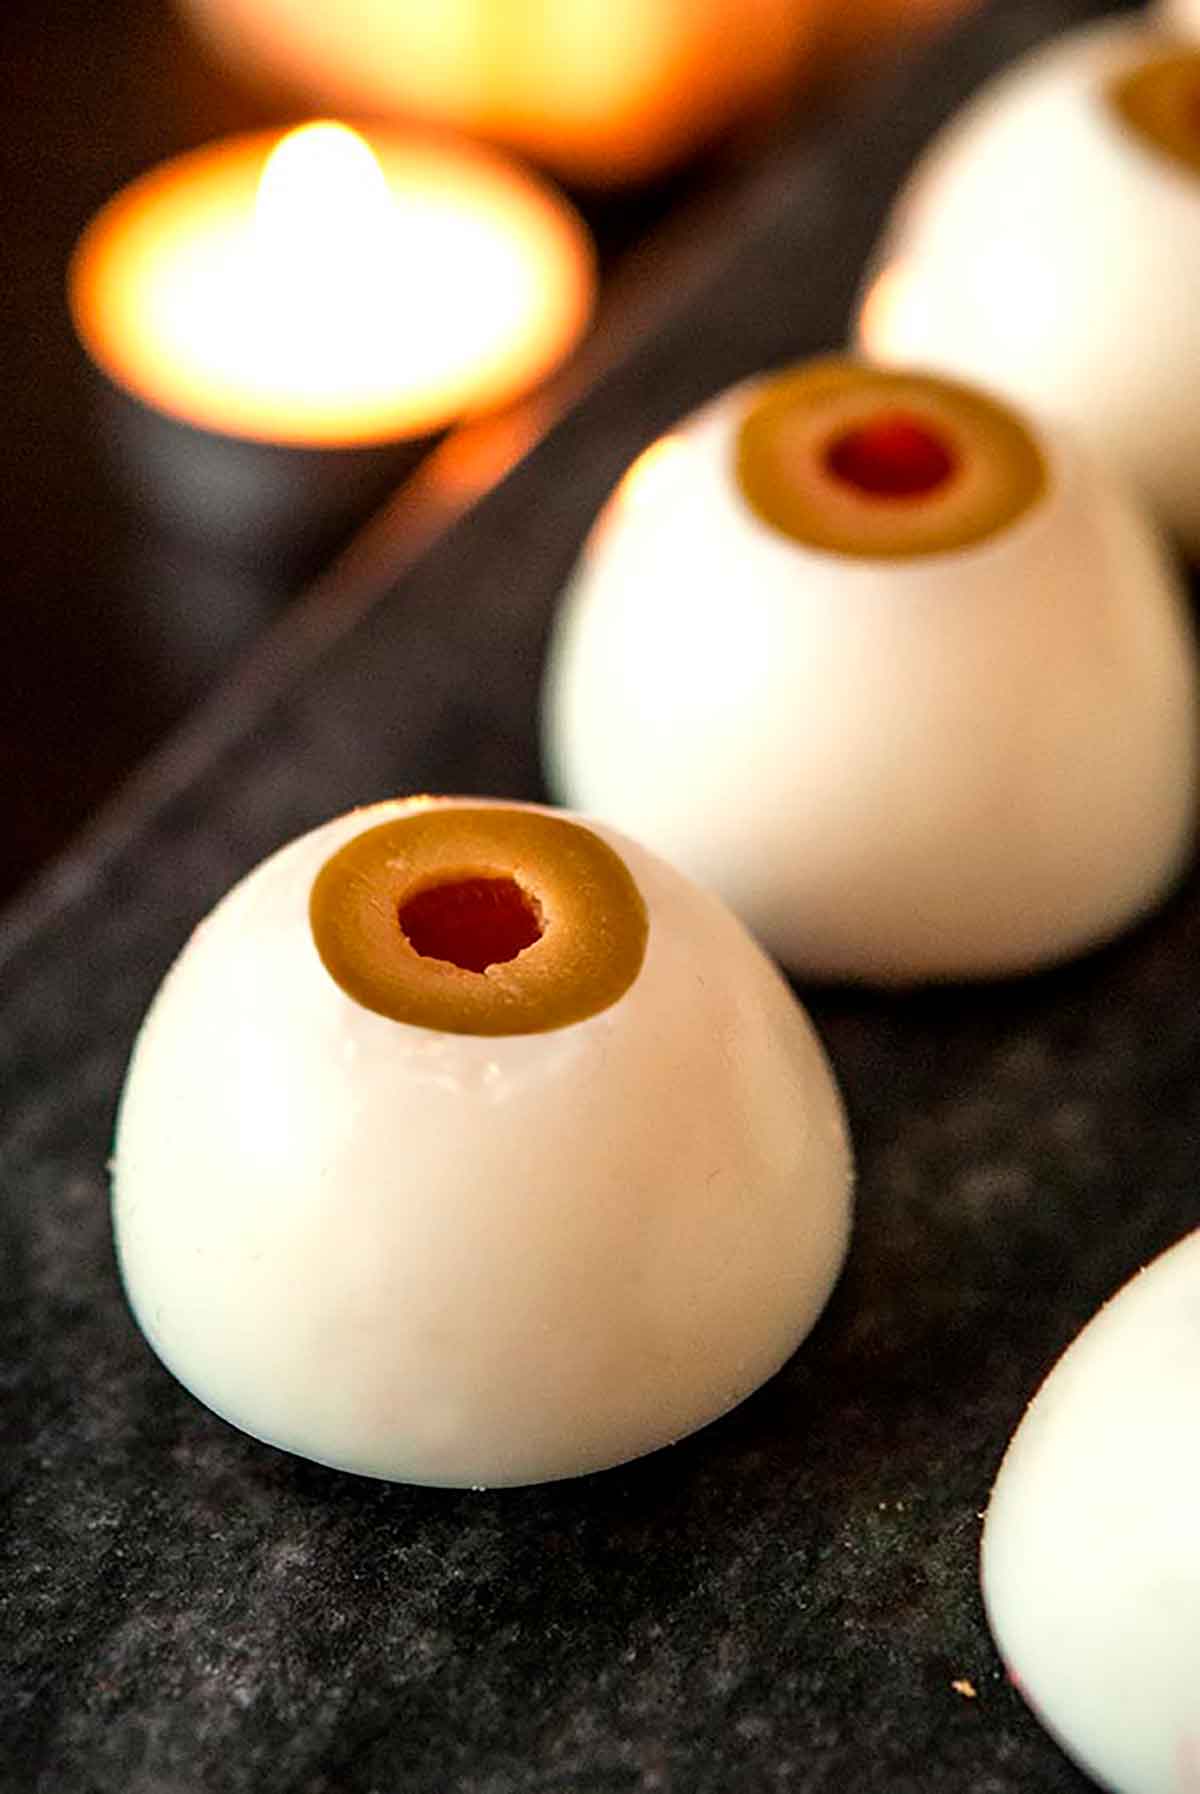 2 deviled eggs that look like eyeballs on a marble plate with a candle in the background.